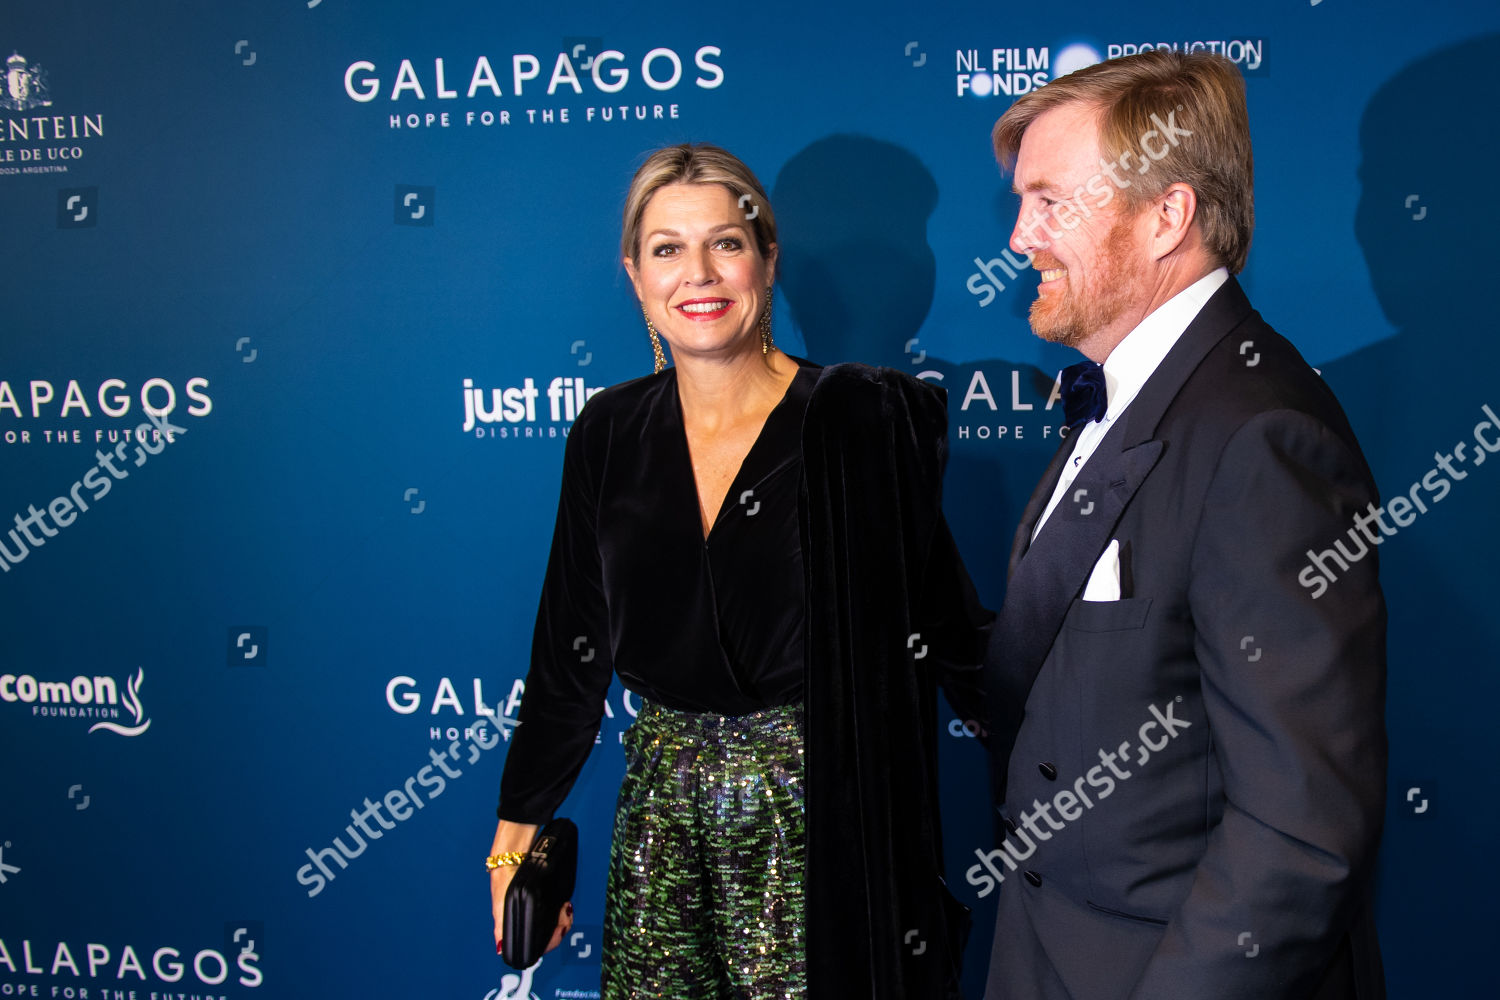 galapagos-hope-for-the-future-documentary-premiere-amsterdam-netherlands-shutterstock-editorial-10459083h.jpg